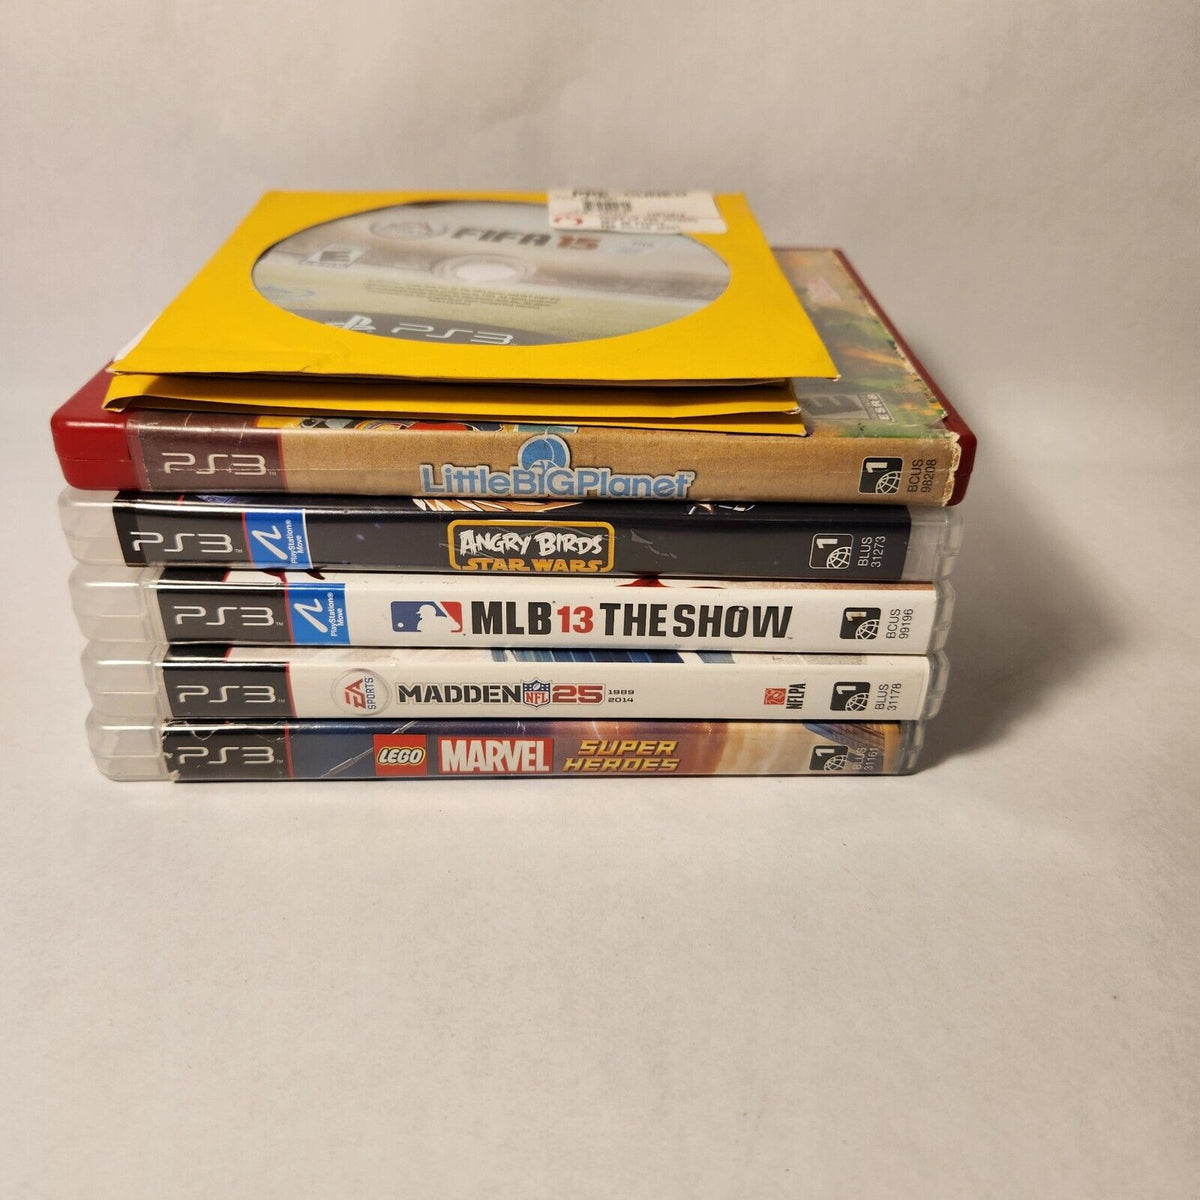 11 PS3 Games Bundle Lot - LEGO: Marvel, FF8, Angry Birds, Kingdom Hearts, Little